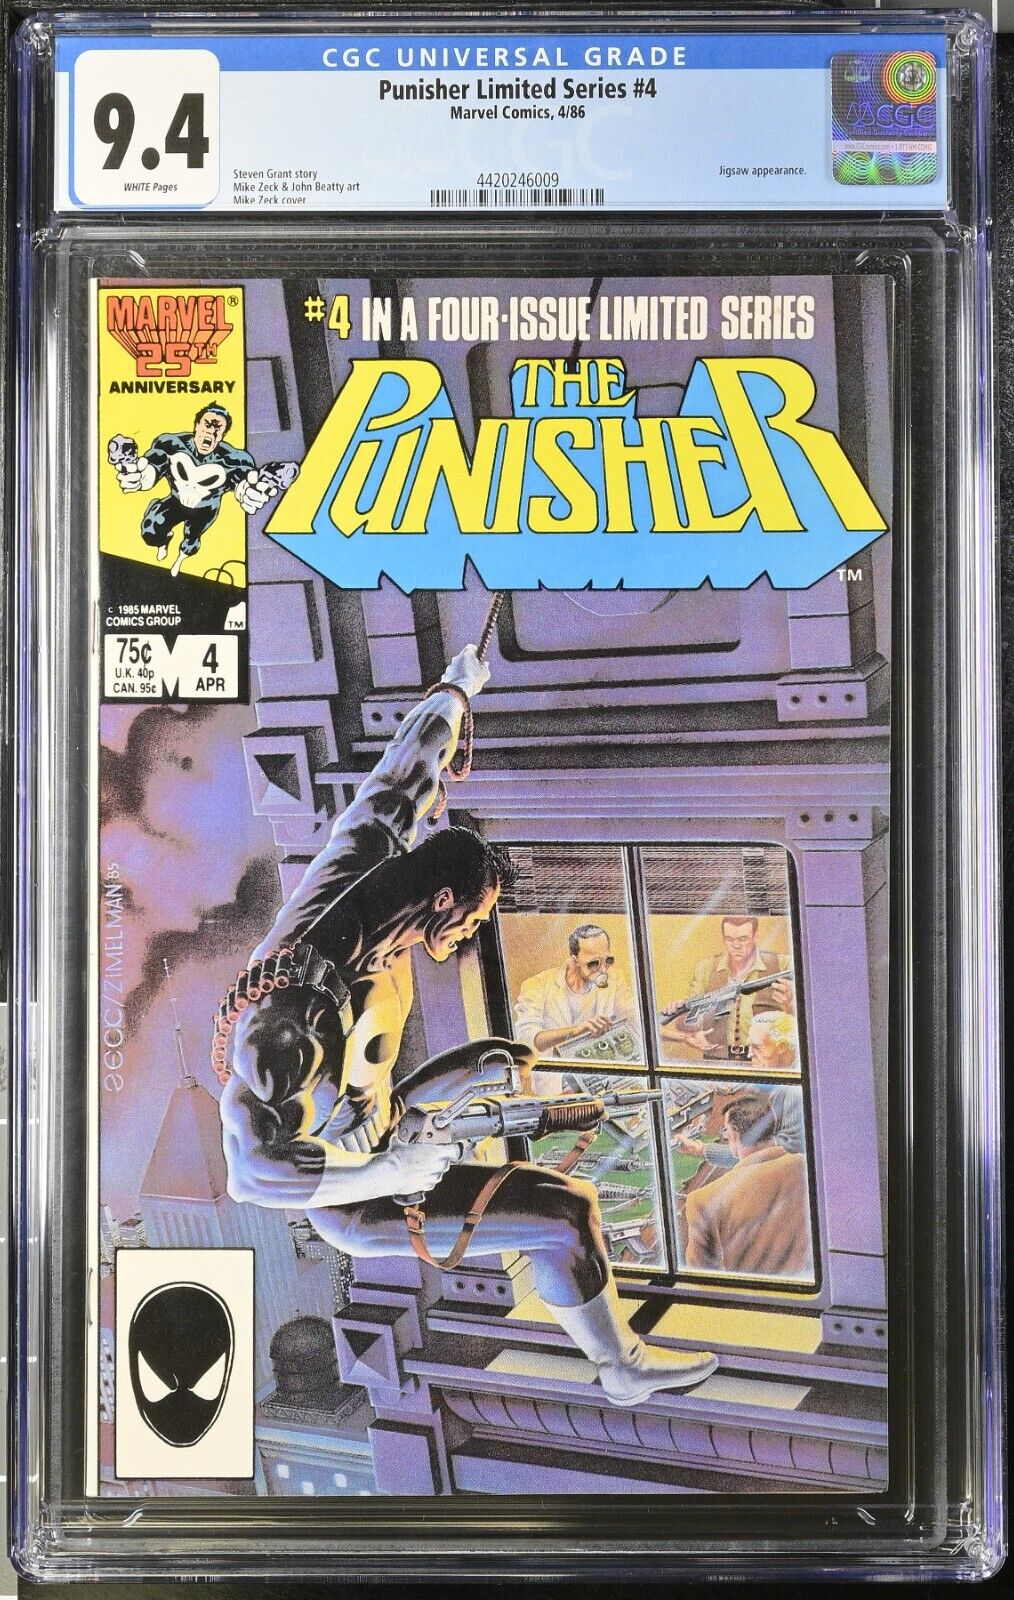 🔑🔥🔥🔥Punisher Limited Series #4 CGC 9.4 Zeck Cover Marvel Comics 1986 246009